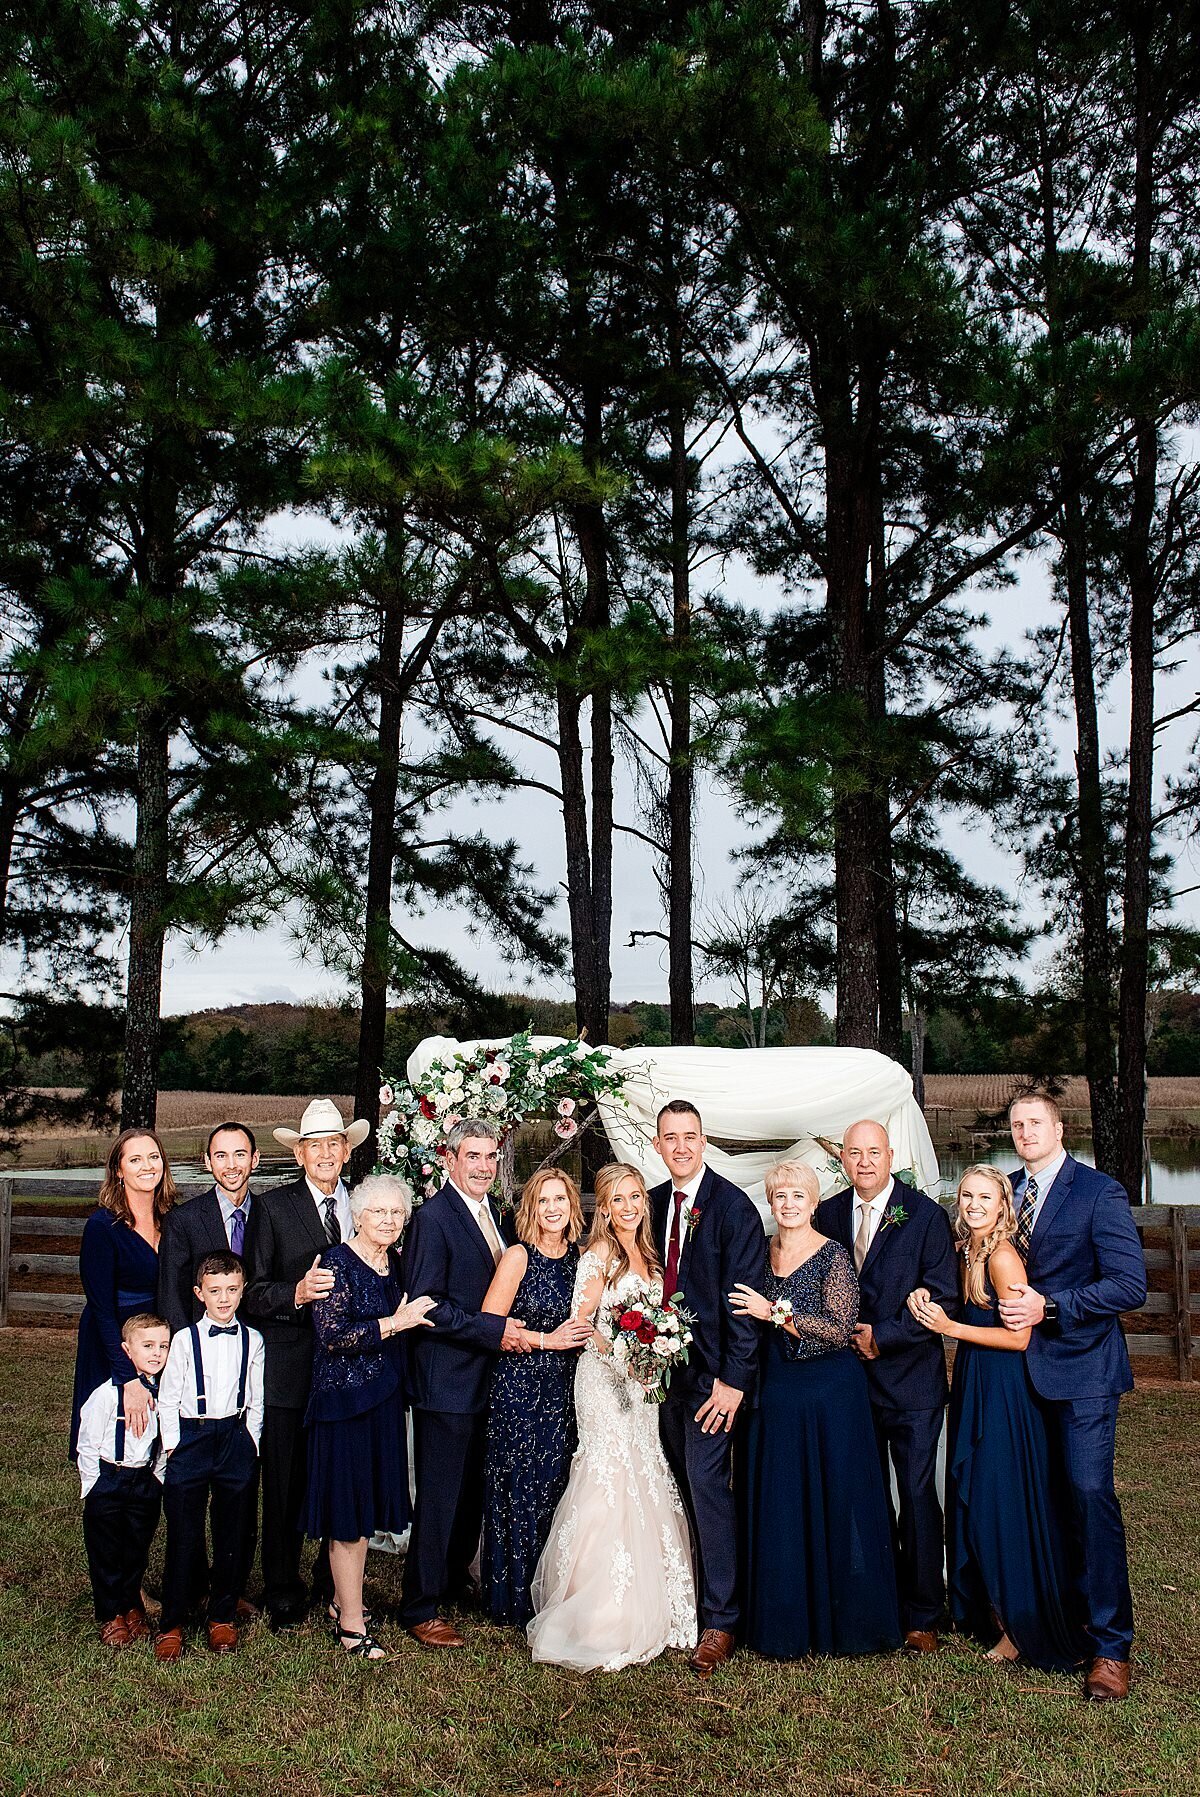 Formal photo of both sides of the family all together with the newlyweds in front of the arbor